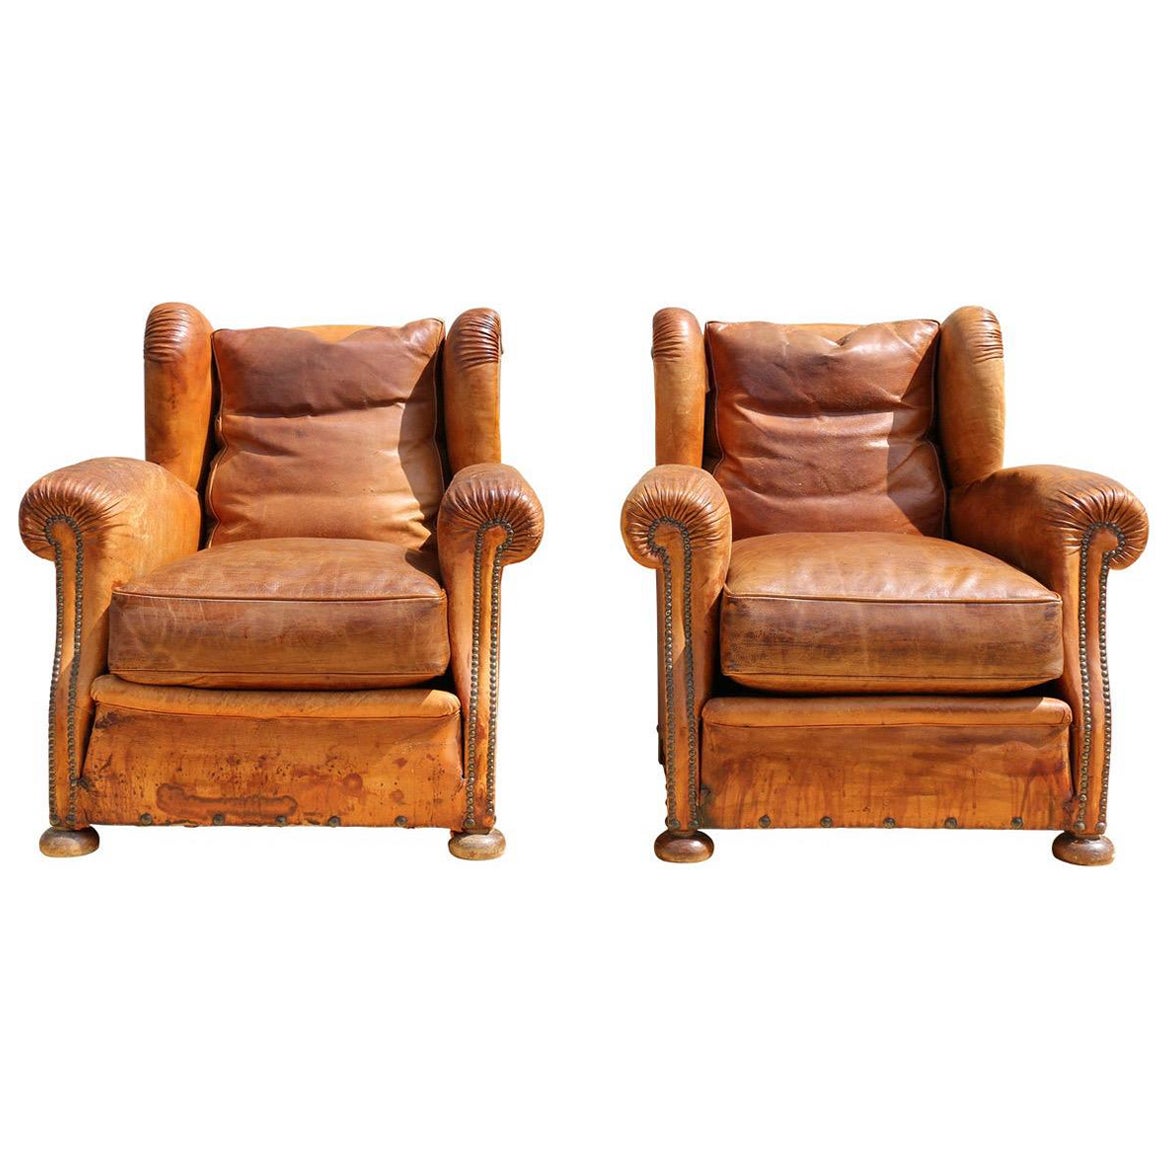 Antique Pair of French Art Deco Distressed Brown Leather Wingback Lounge Chairs